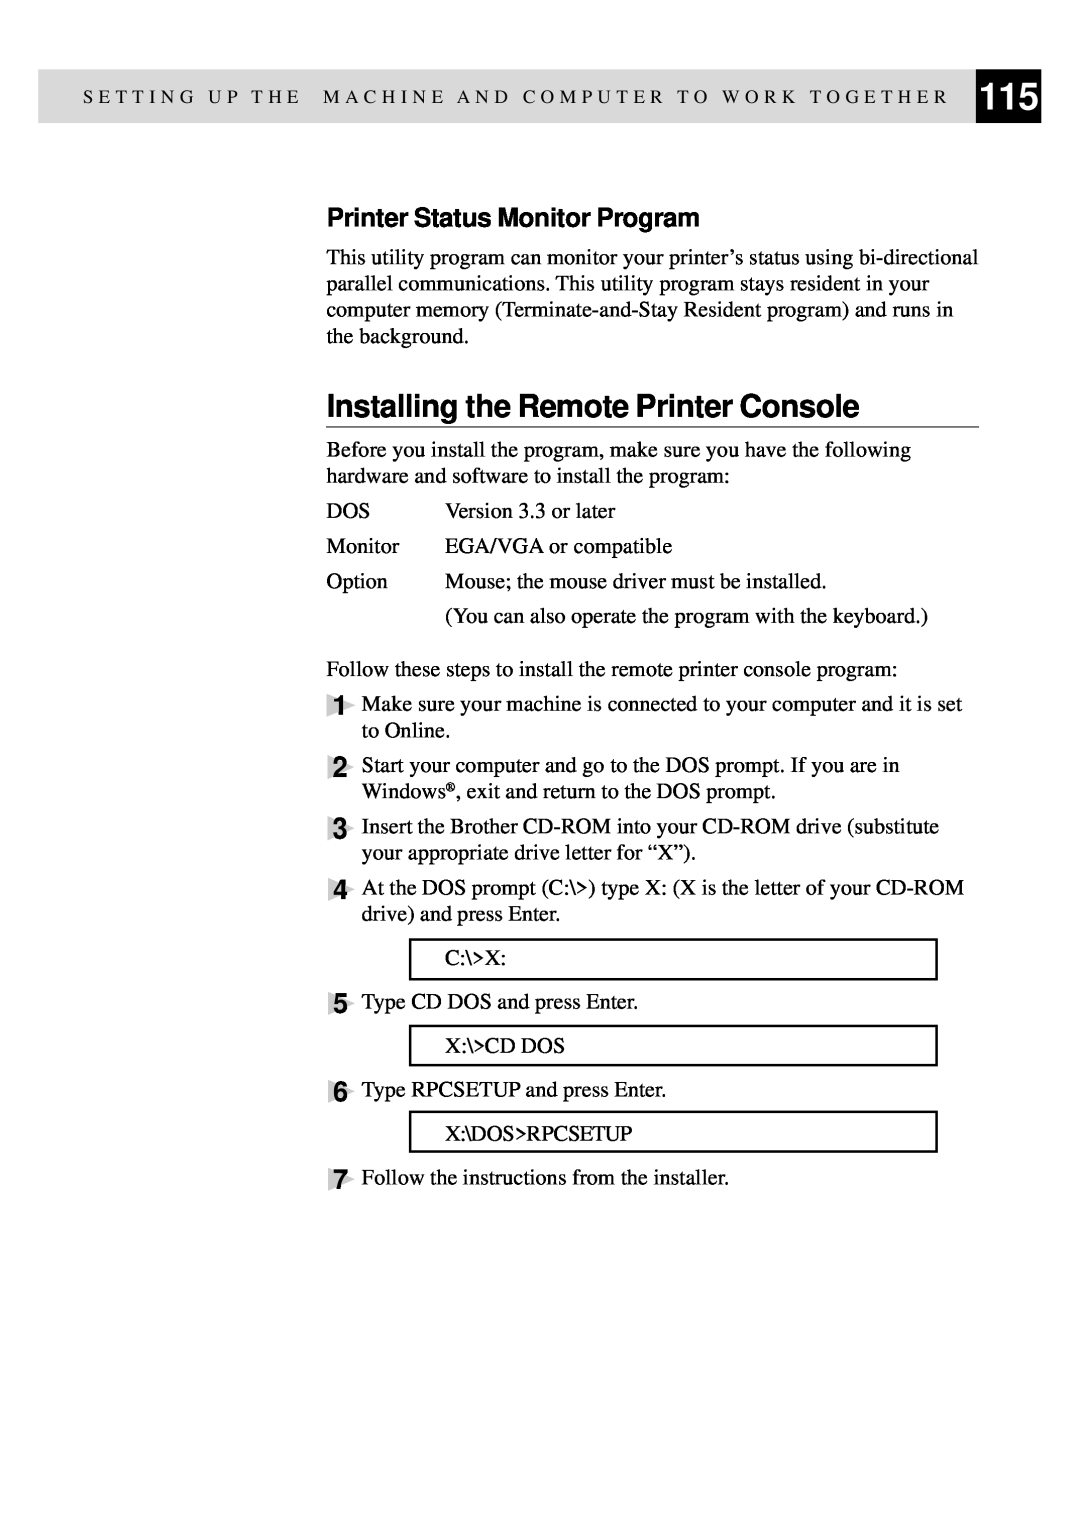 Brother MFC-9650, FAX-8350P owner manual Installing the Remote Printer Console, Printer Status Monitor Program 